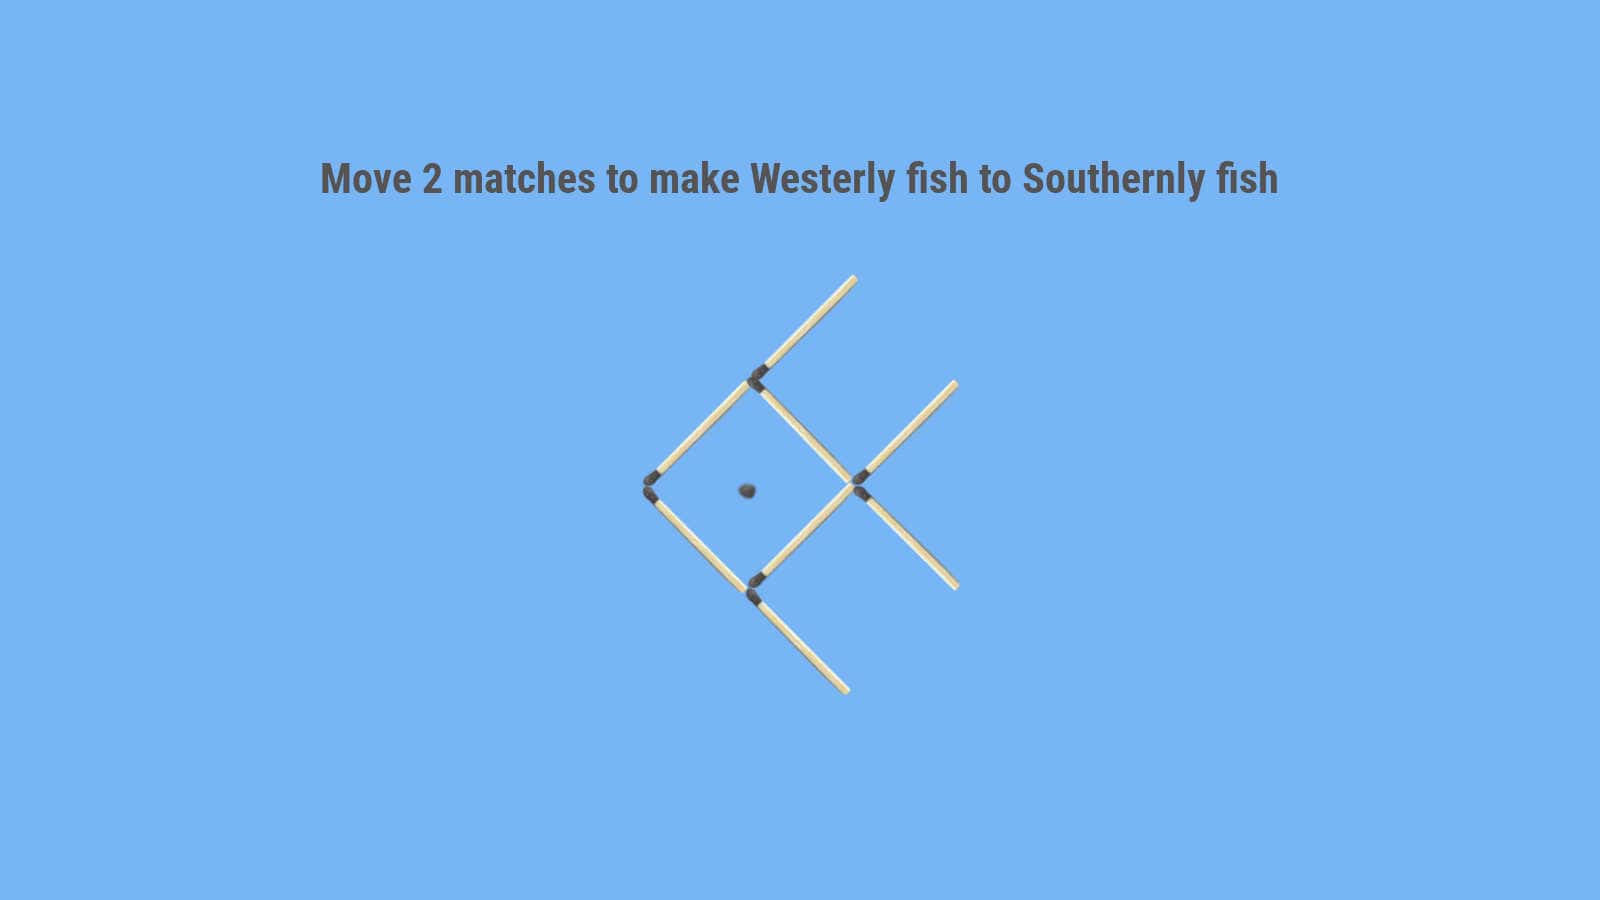 Turn the Westerly fish to Southerly swimming fish in 2 moves